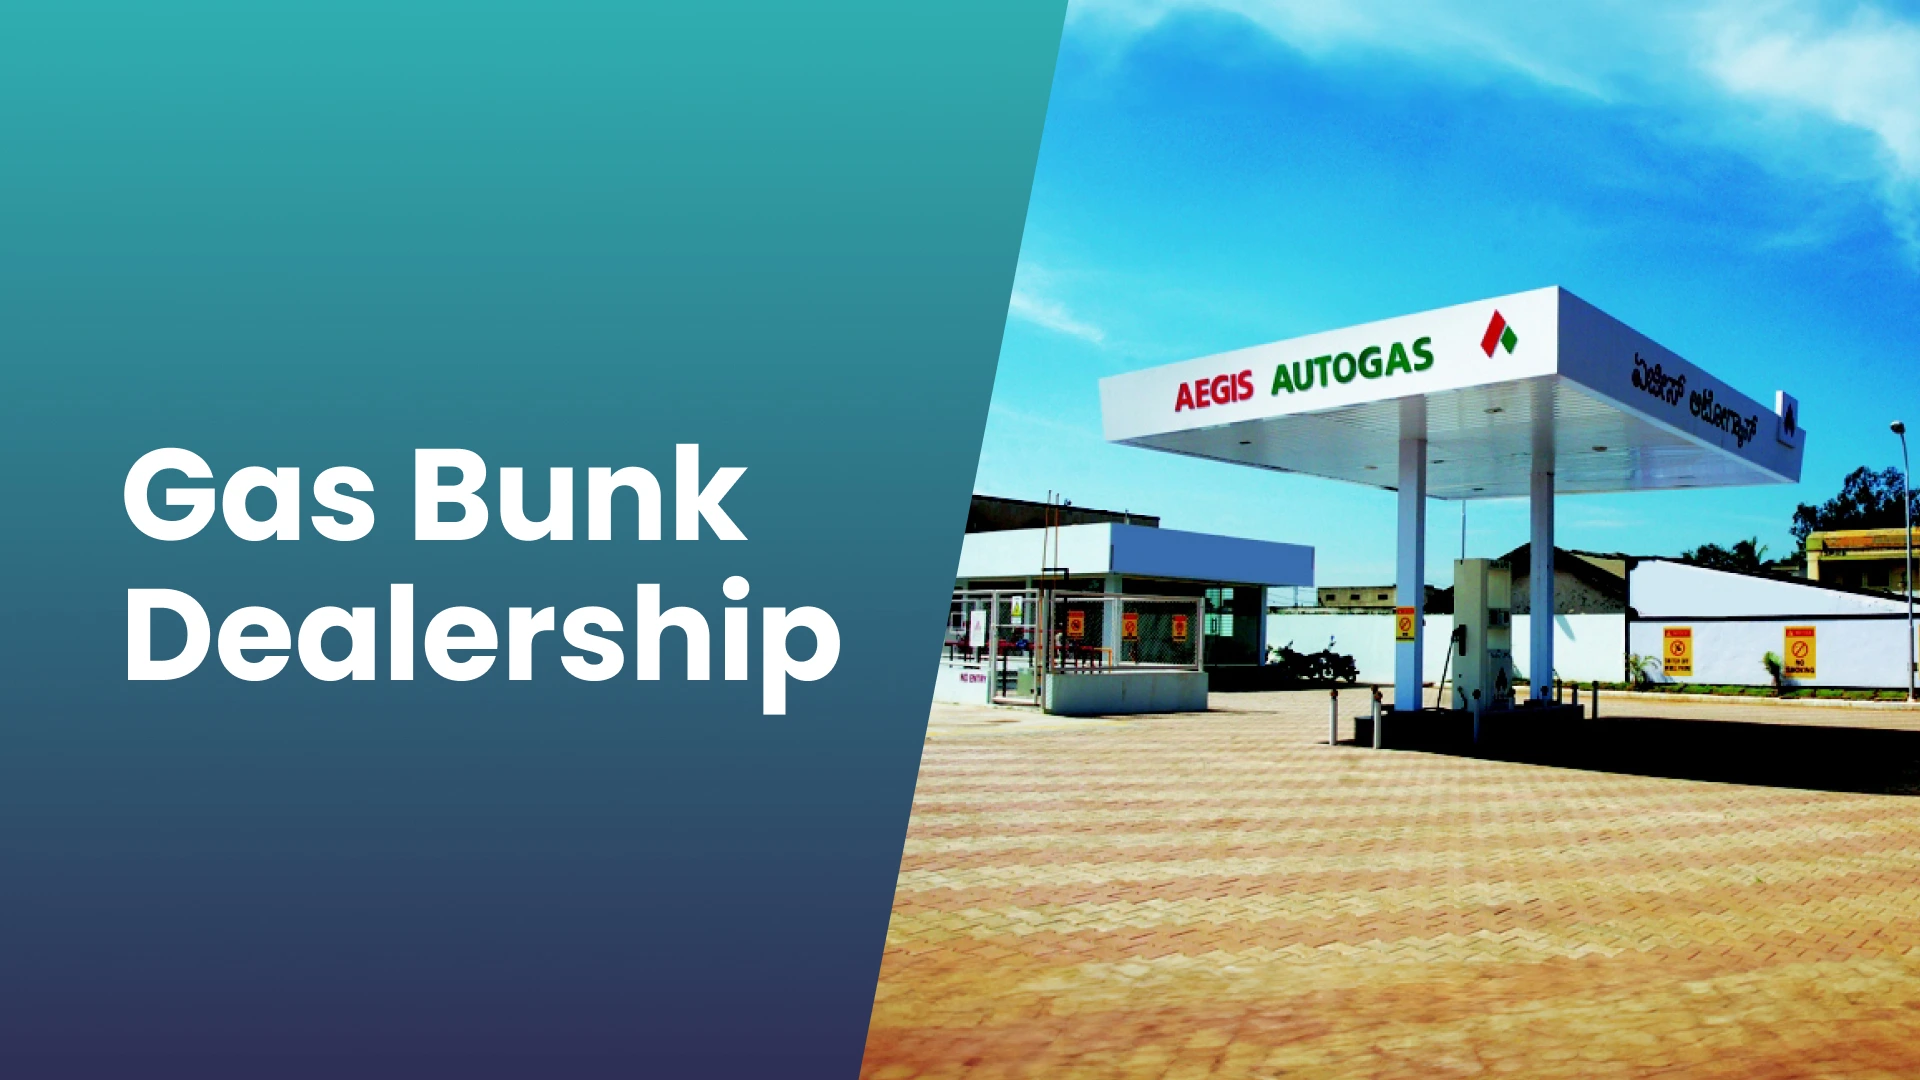 Course Trailer: How to get Aegis LPG Bunk  Dealership?. Watch to know more.